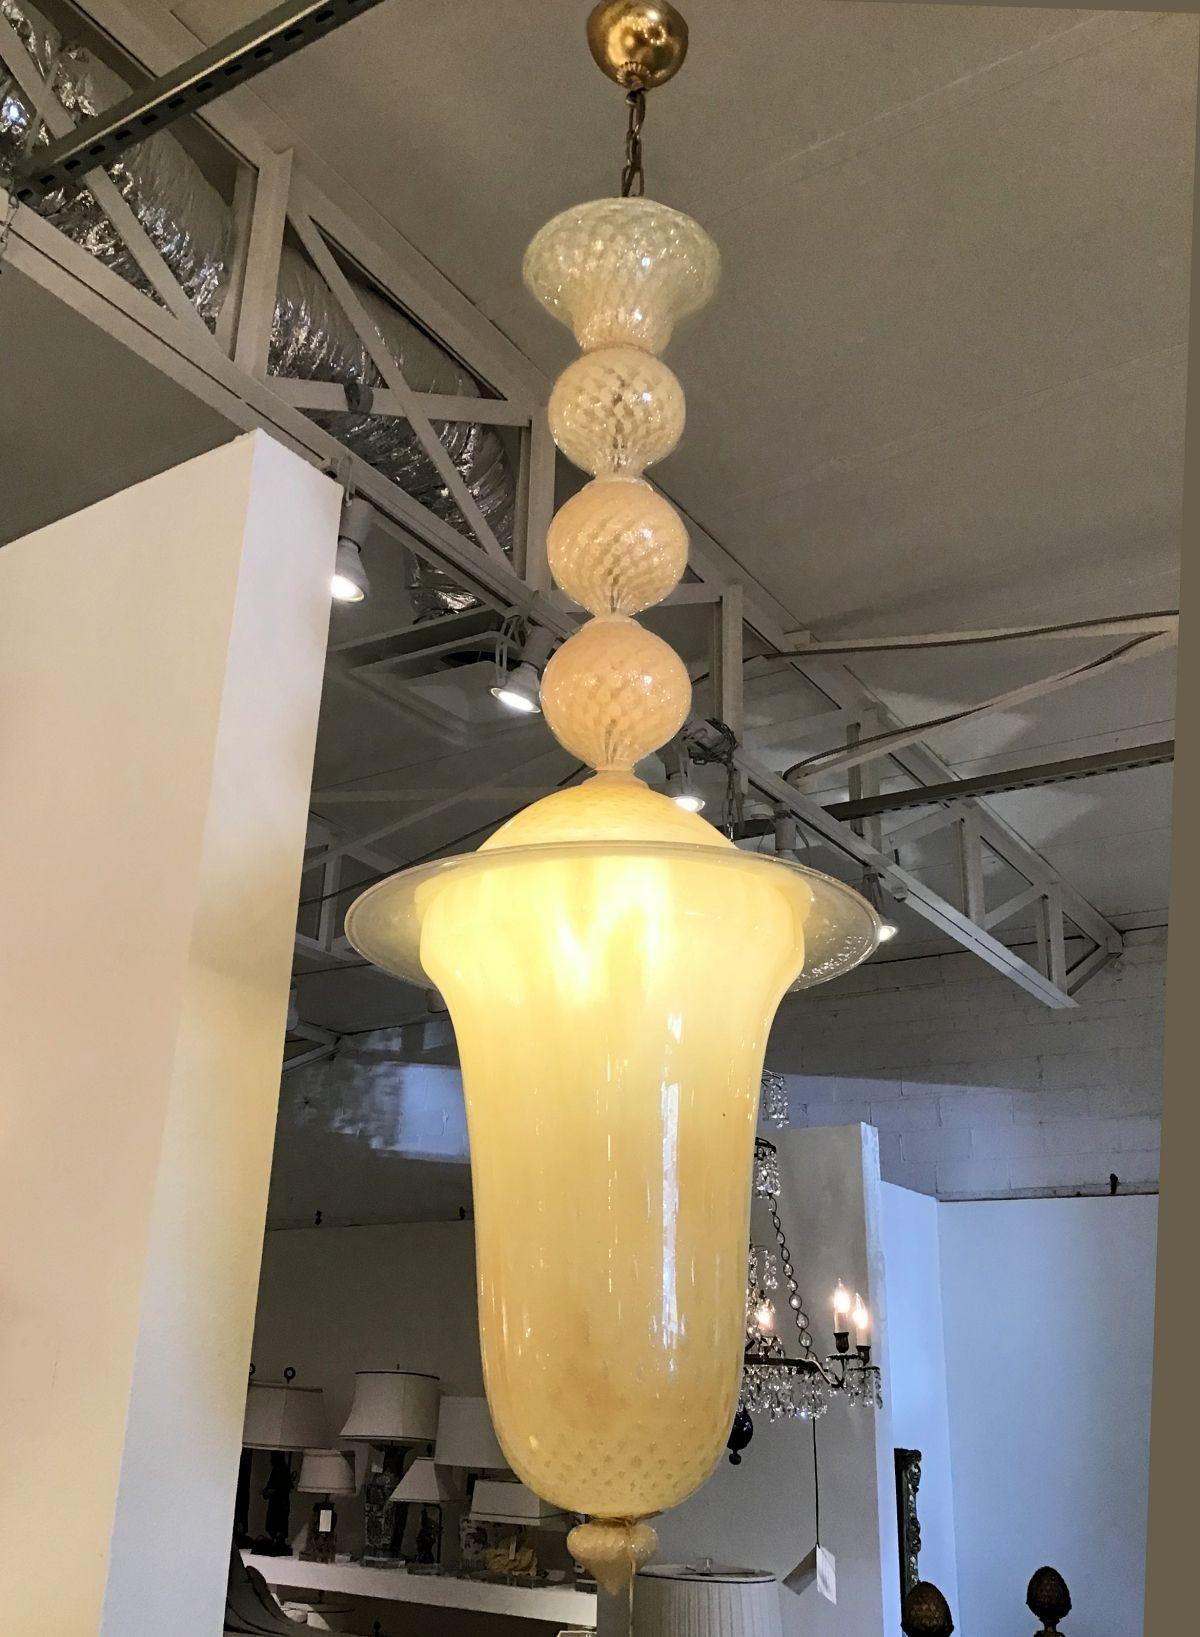 Large-scale Murano glass mid-century modern lantern or chandelier.
Neoclassical style . By Seguso, Italy 1960s.
The Mid-century Murano glass lantern has a golden yellow or Beige color.
The glass work technique is called Balloton, consisting in air